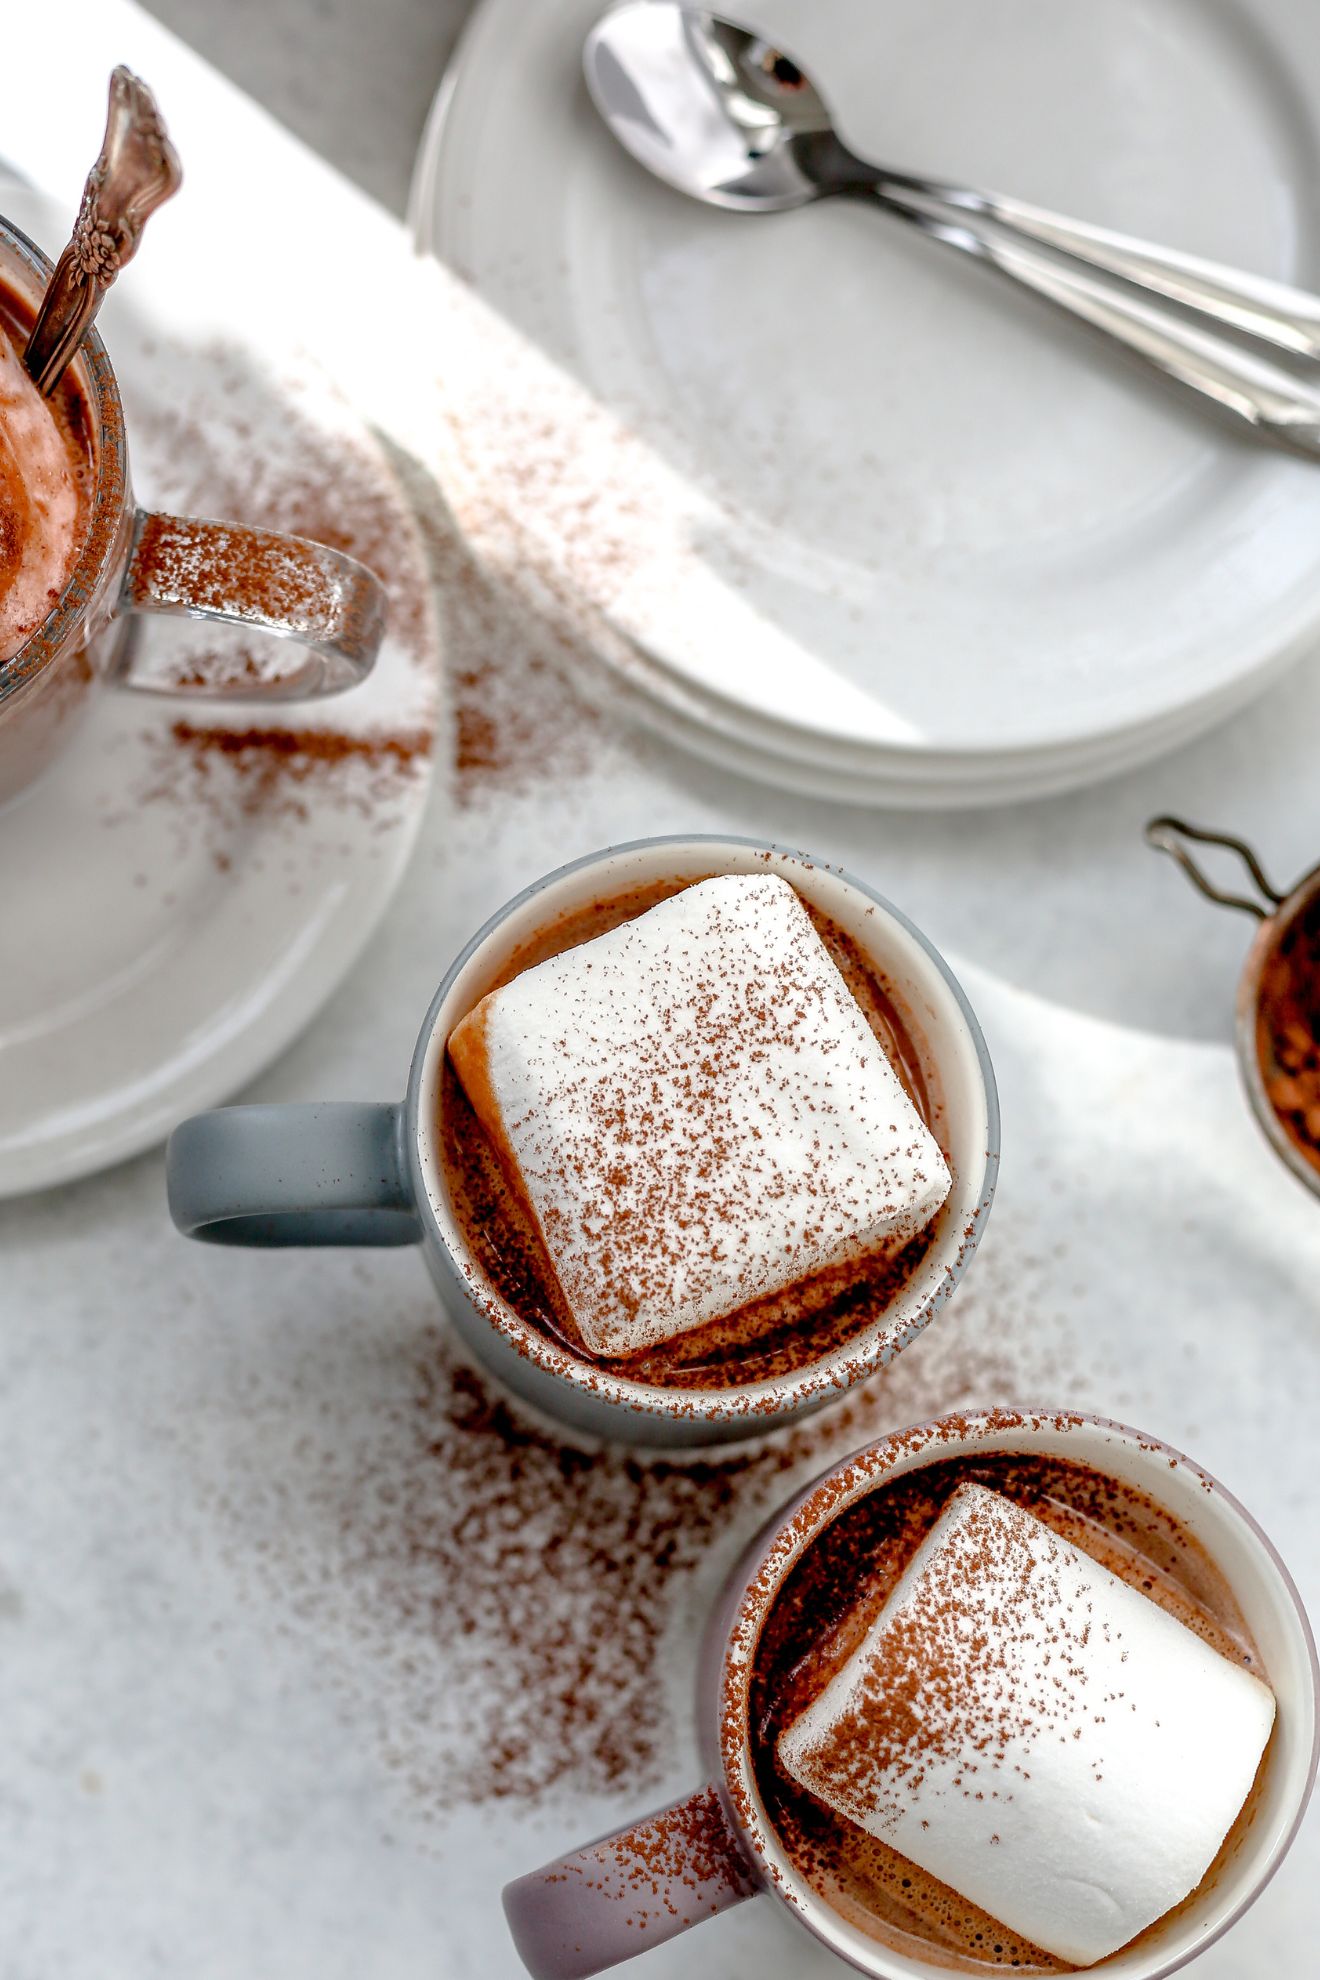 Stay warm with this hot chocolate pot - CNET